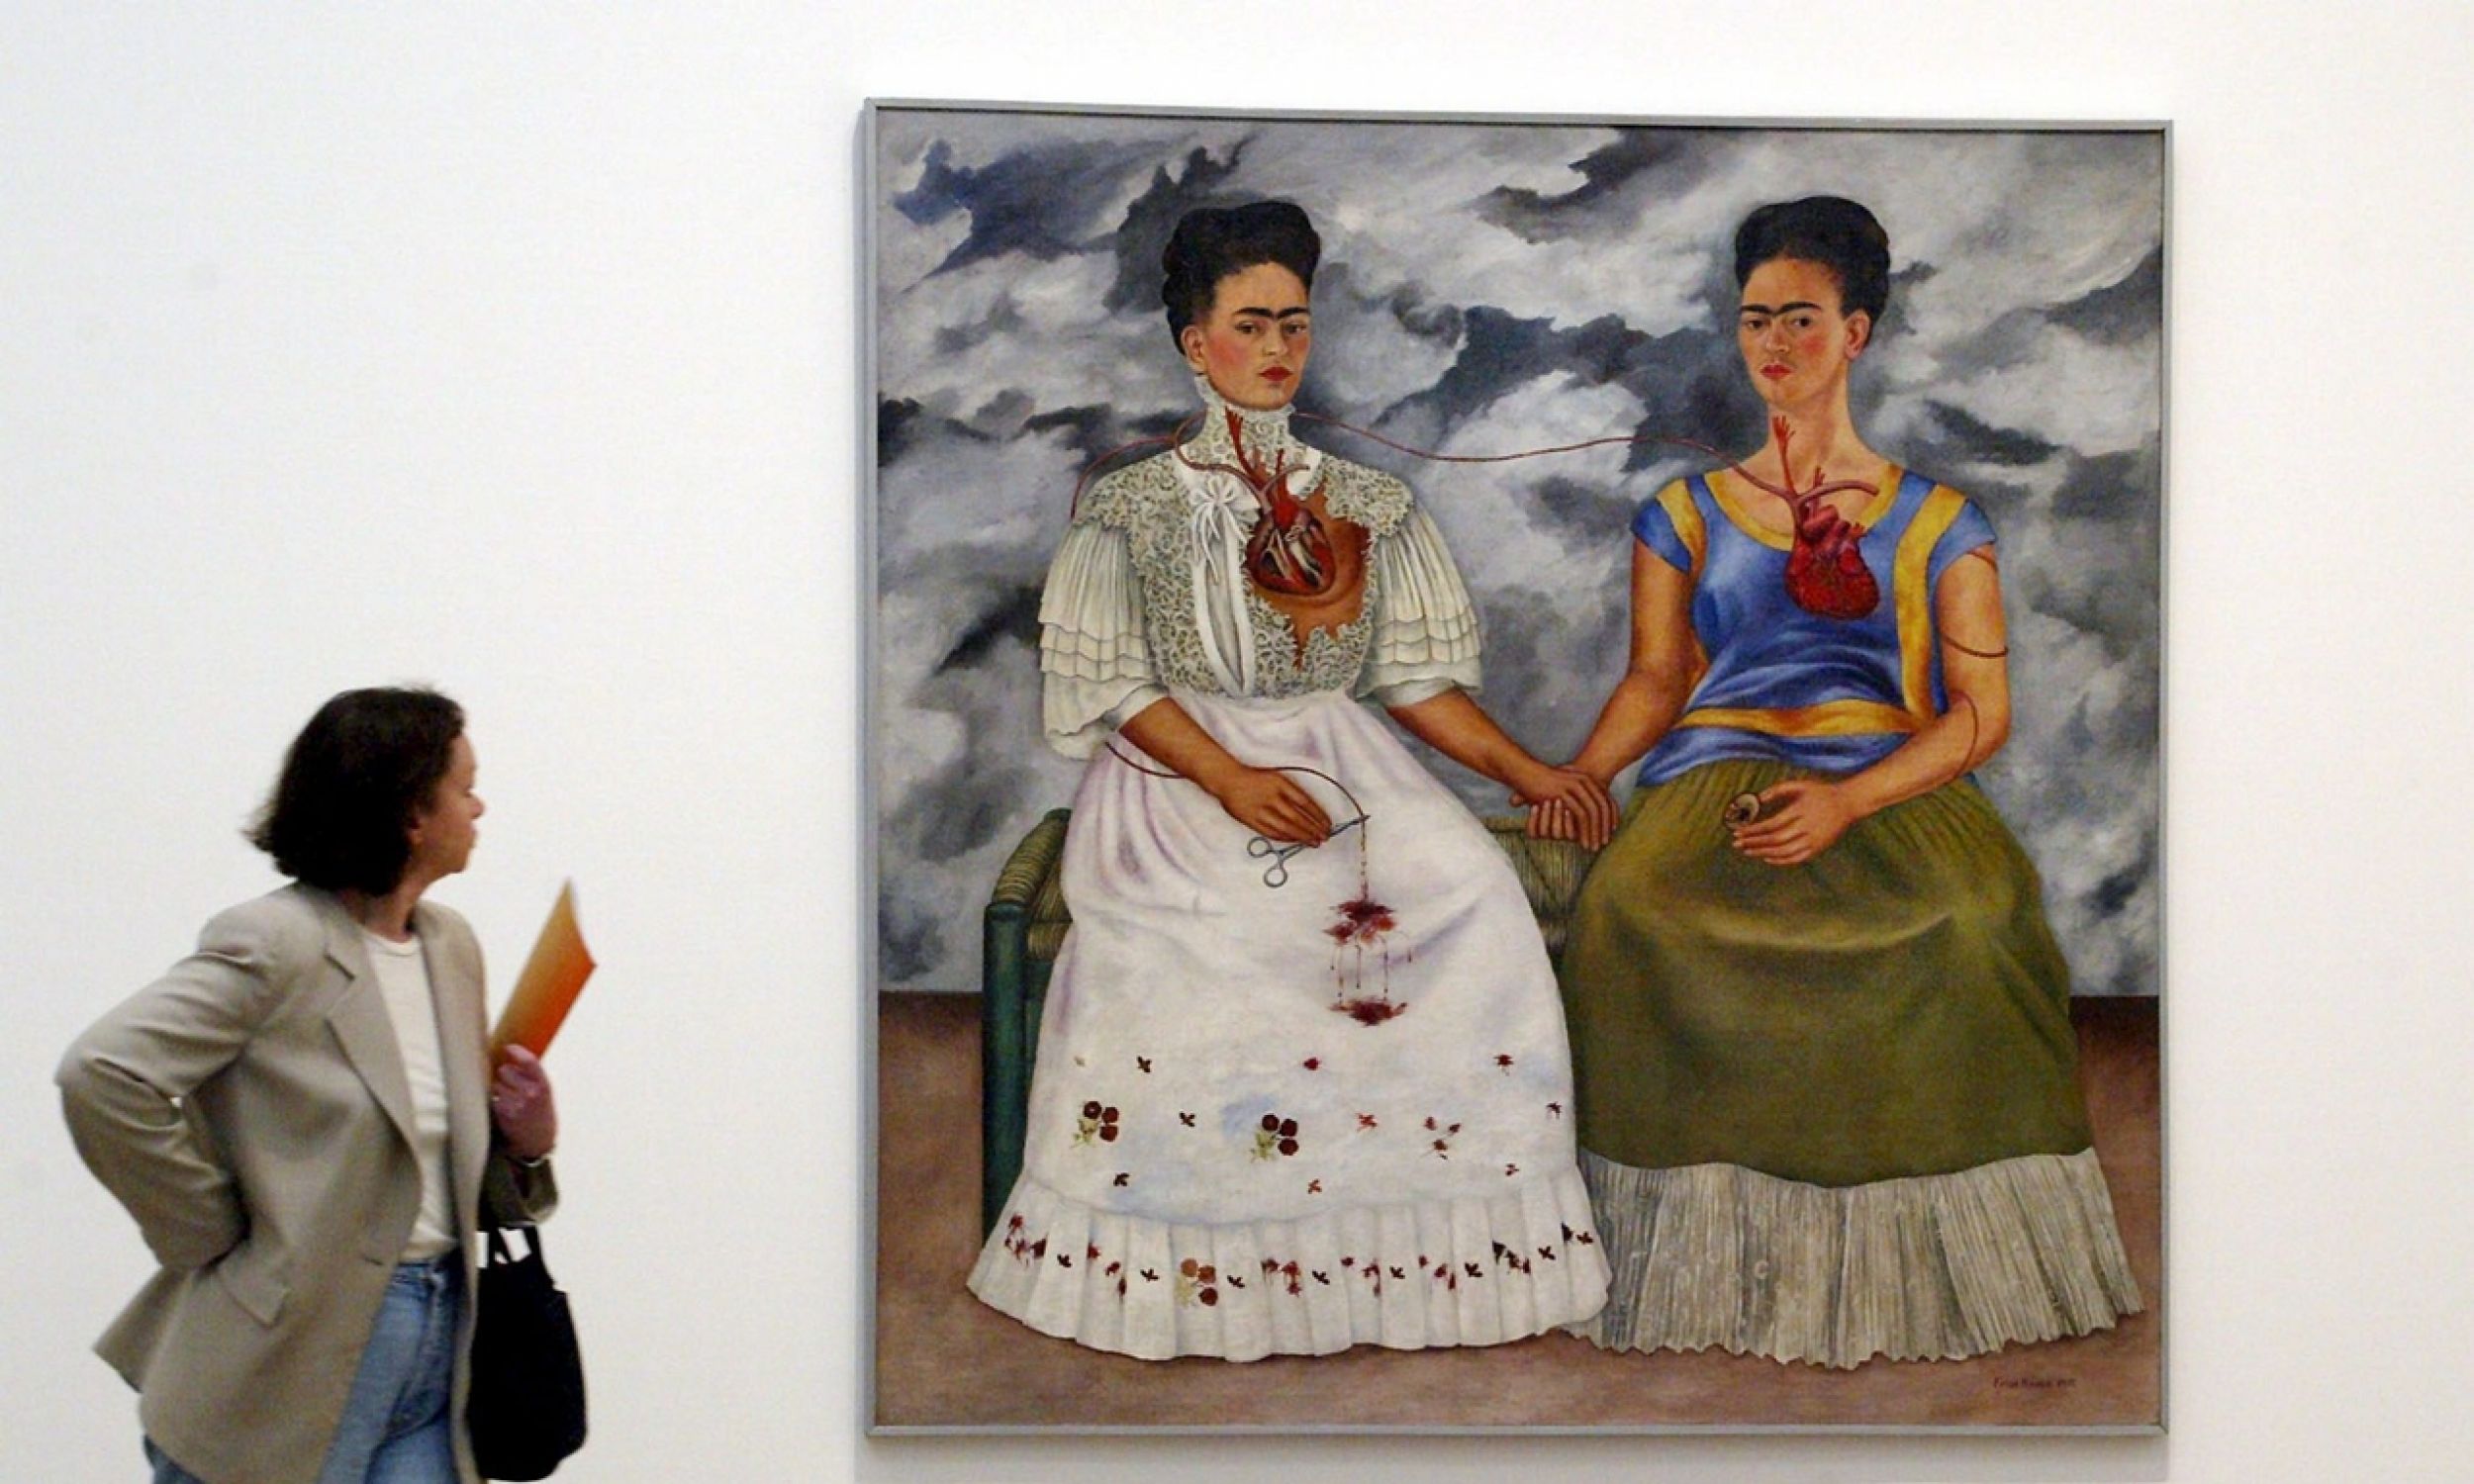 The painting “Two Fridas” on display at the Tate Modern in London in 2005, the first major exhibition of the famous Mexican artist Frida Kahlo in over 20 years. Photo: PAP/EPA, Gerry Penny